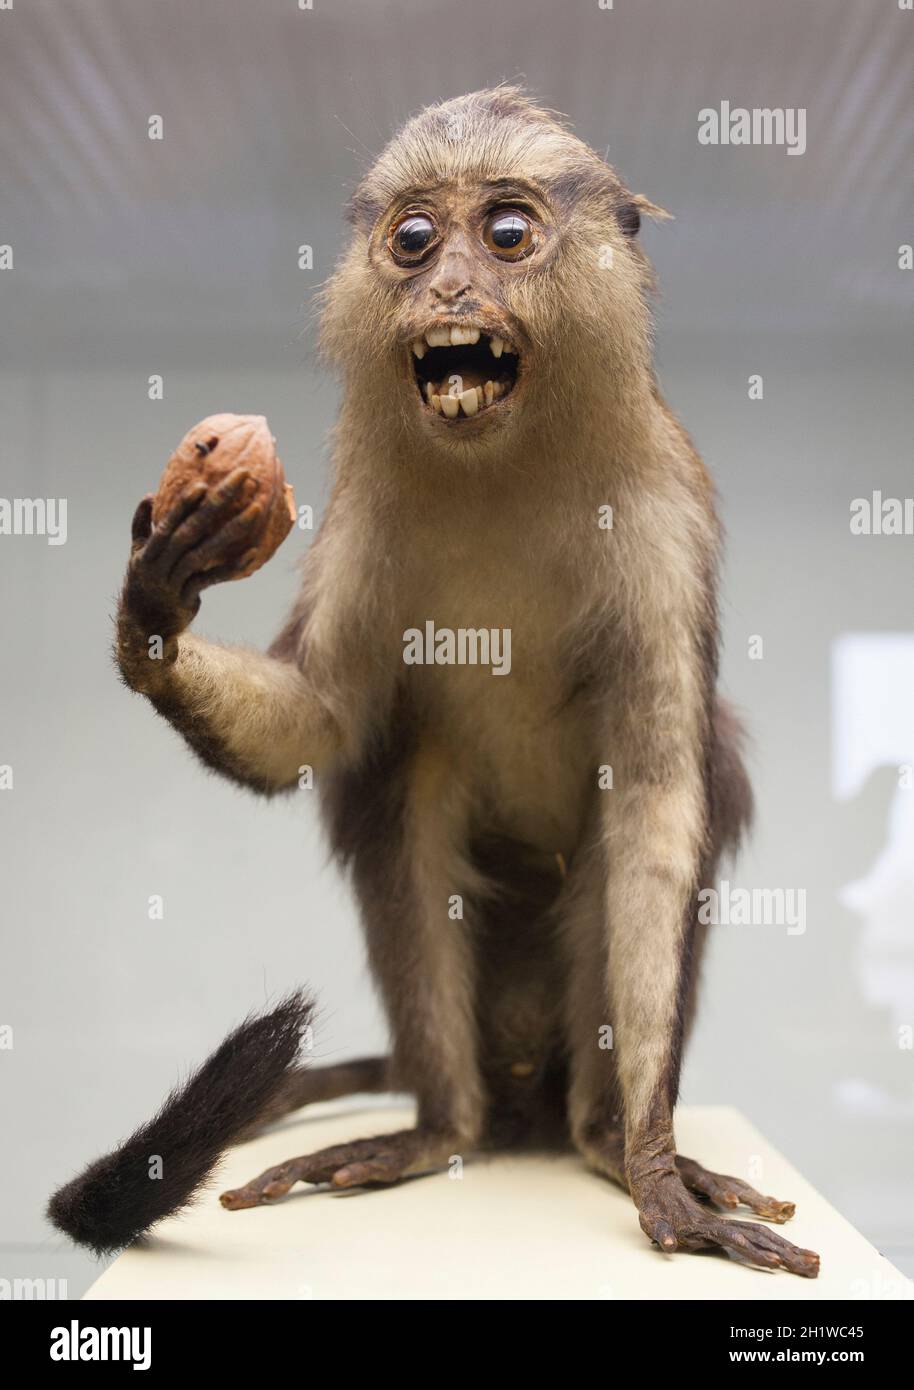 Coimbra, Portugal - Sept 6th 2019: Stuffed Mona monkey. Science Museum of the University of Coimbra Stock Photo